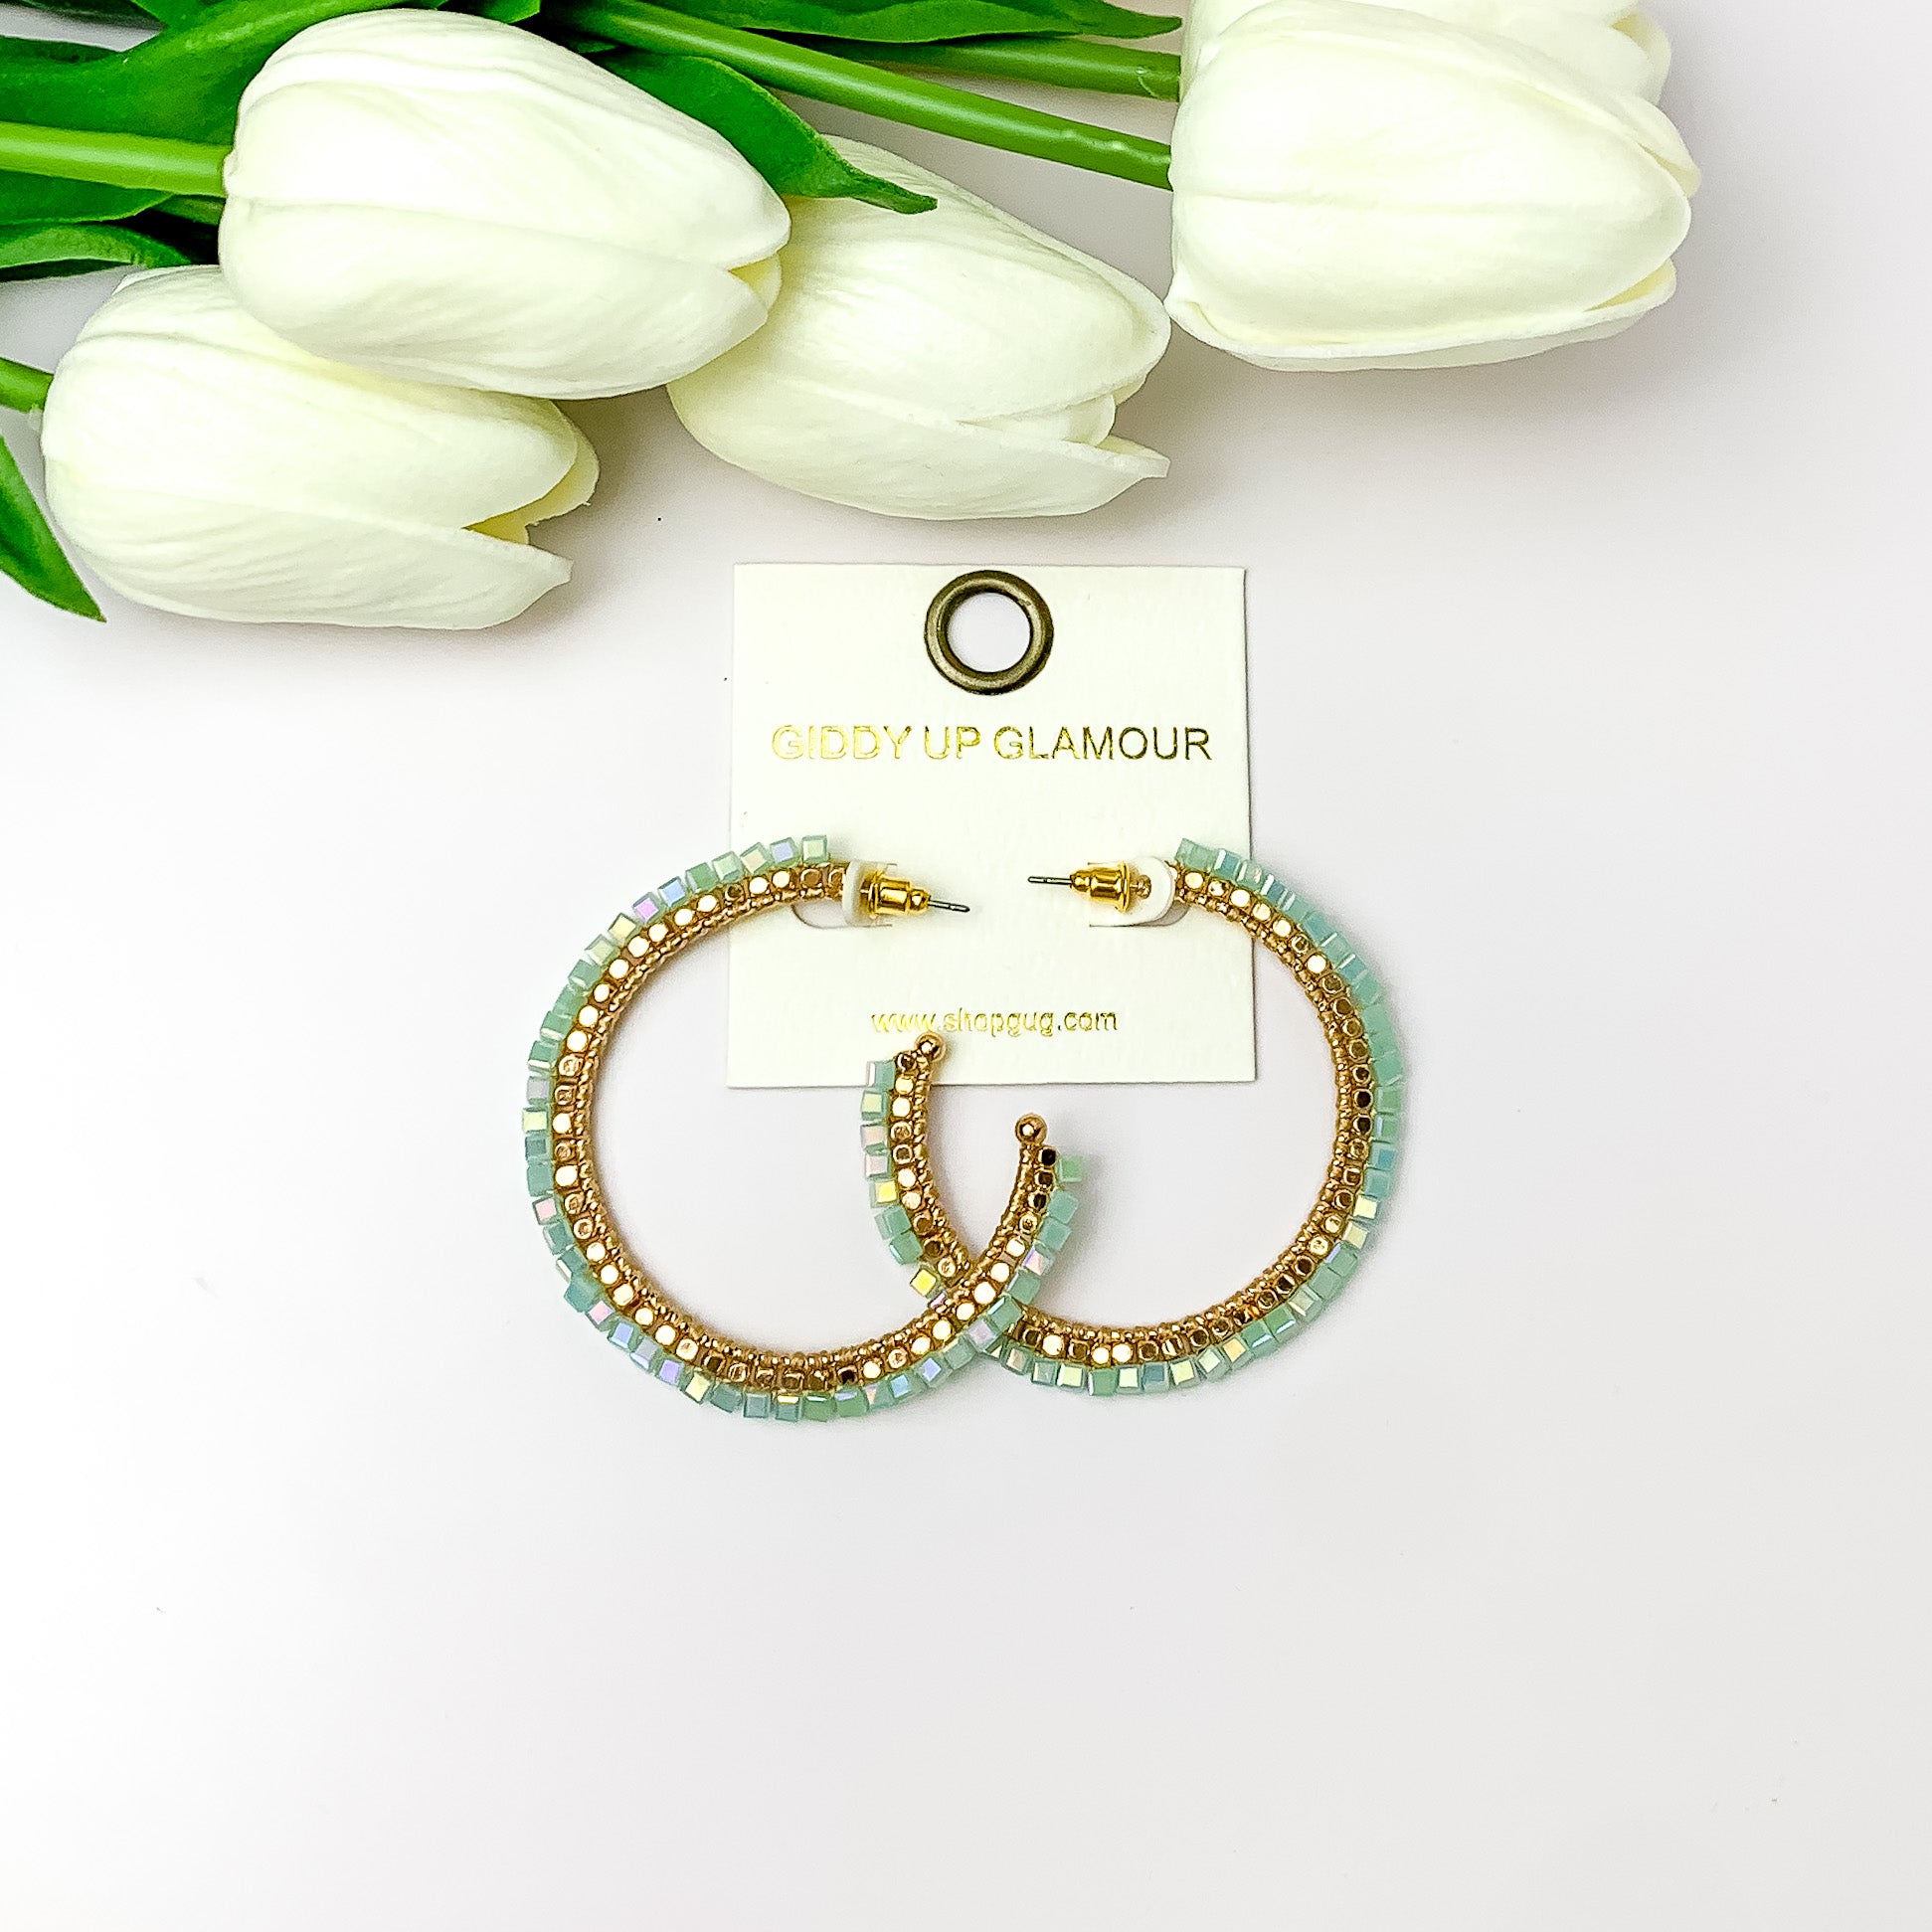 Pictured are circle gold toned hoop earrings with gold beads around it and mint crystal outline. They are pictured with white flowers on a white background.